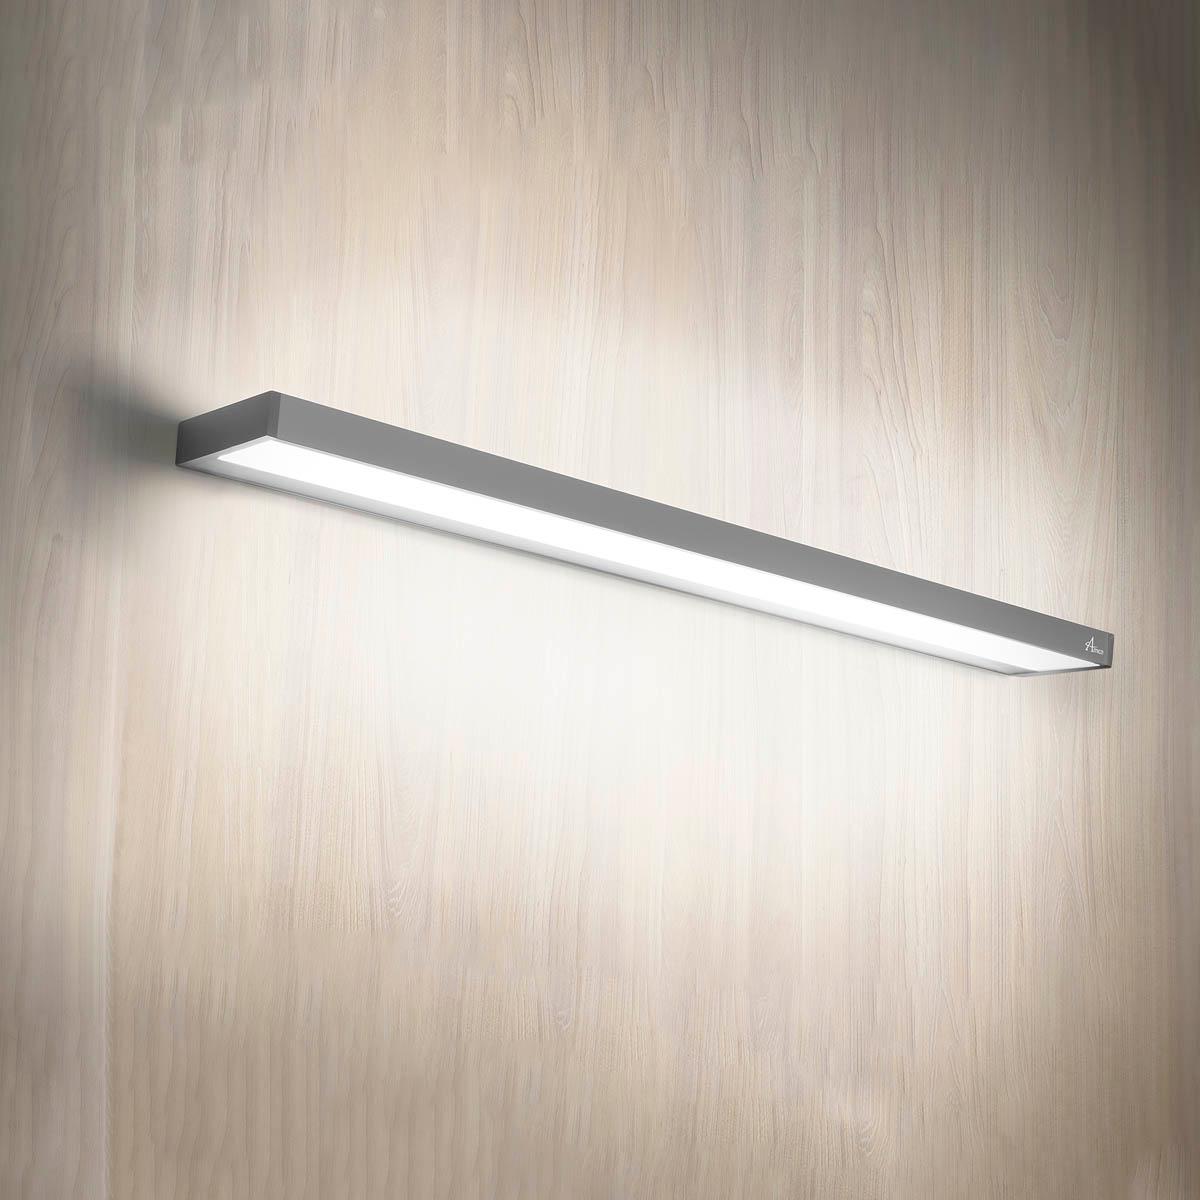 Gallery image for Amico's Skyline Series  Slimline Overbed - LED Light